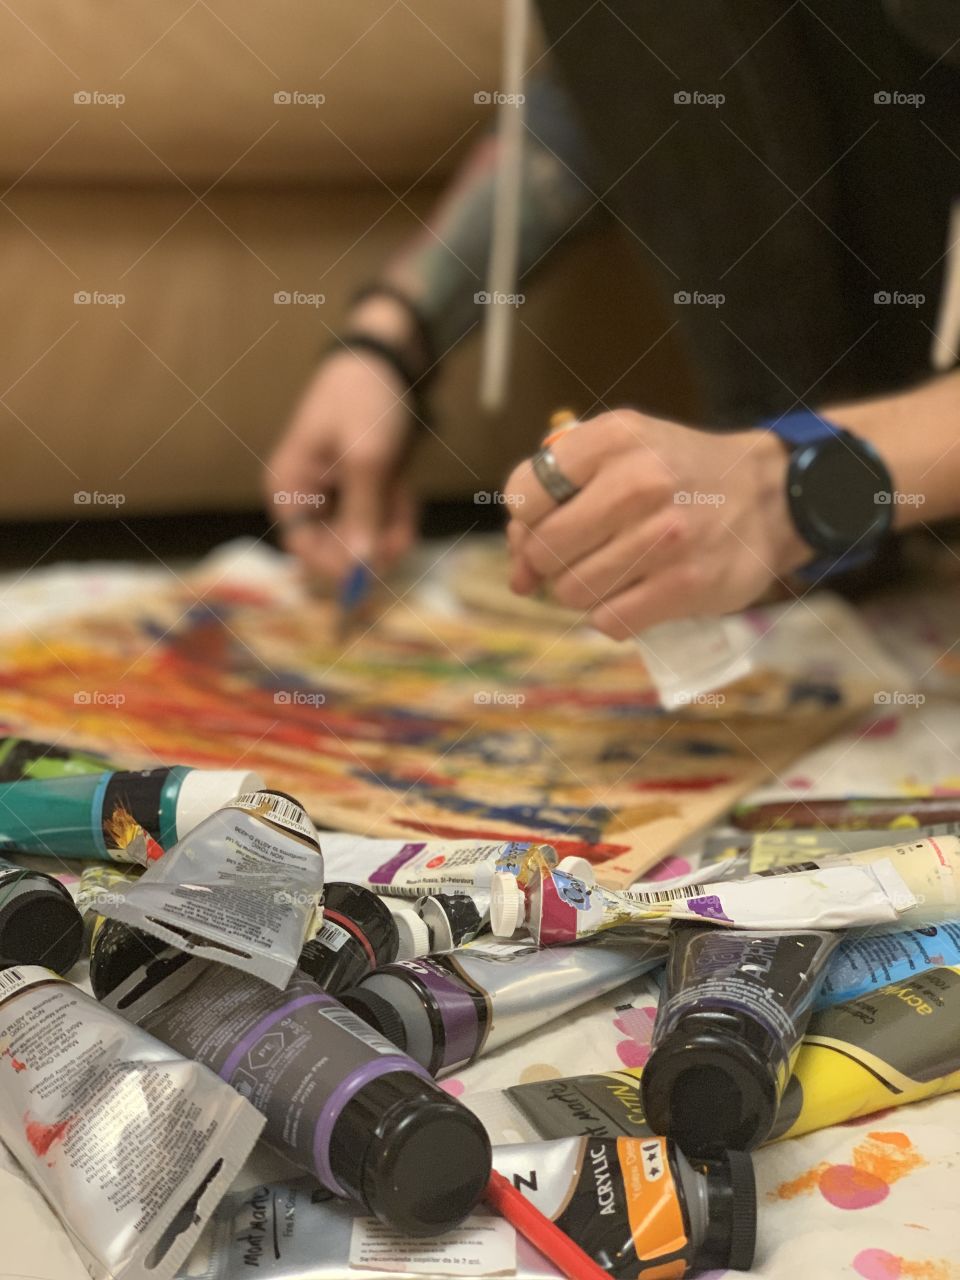 Painting is my passion. Do you know something about art therapy?